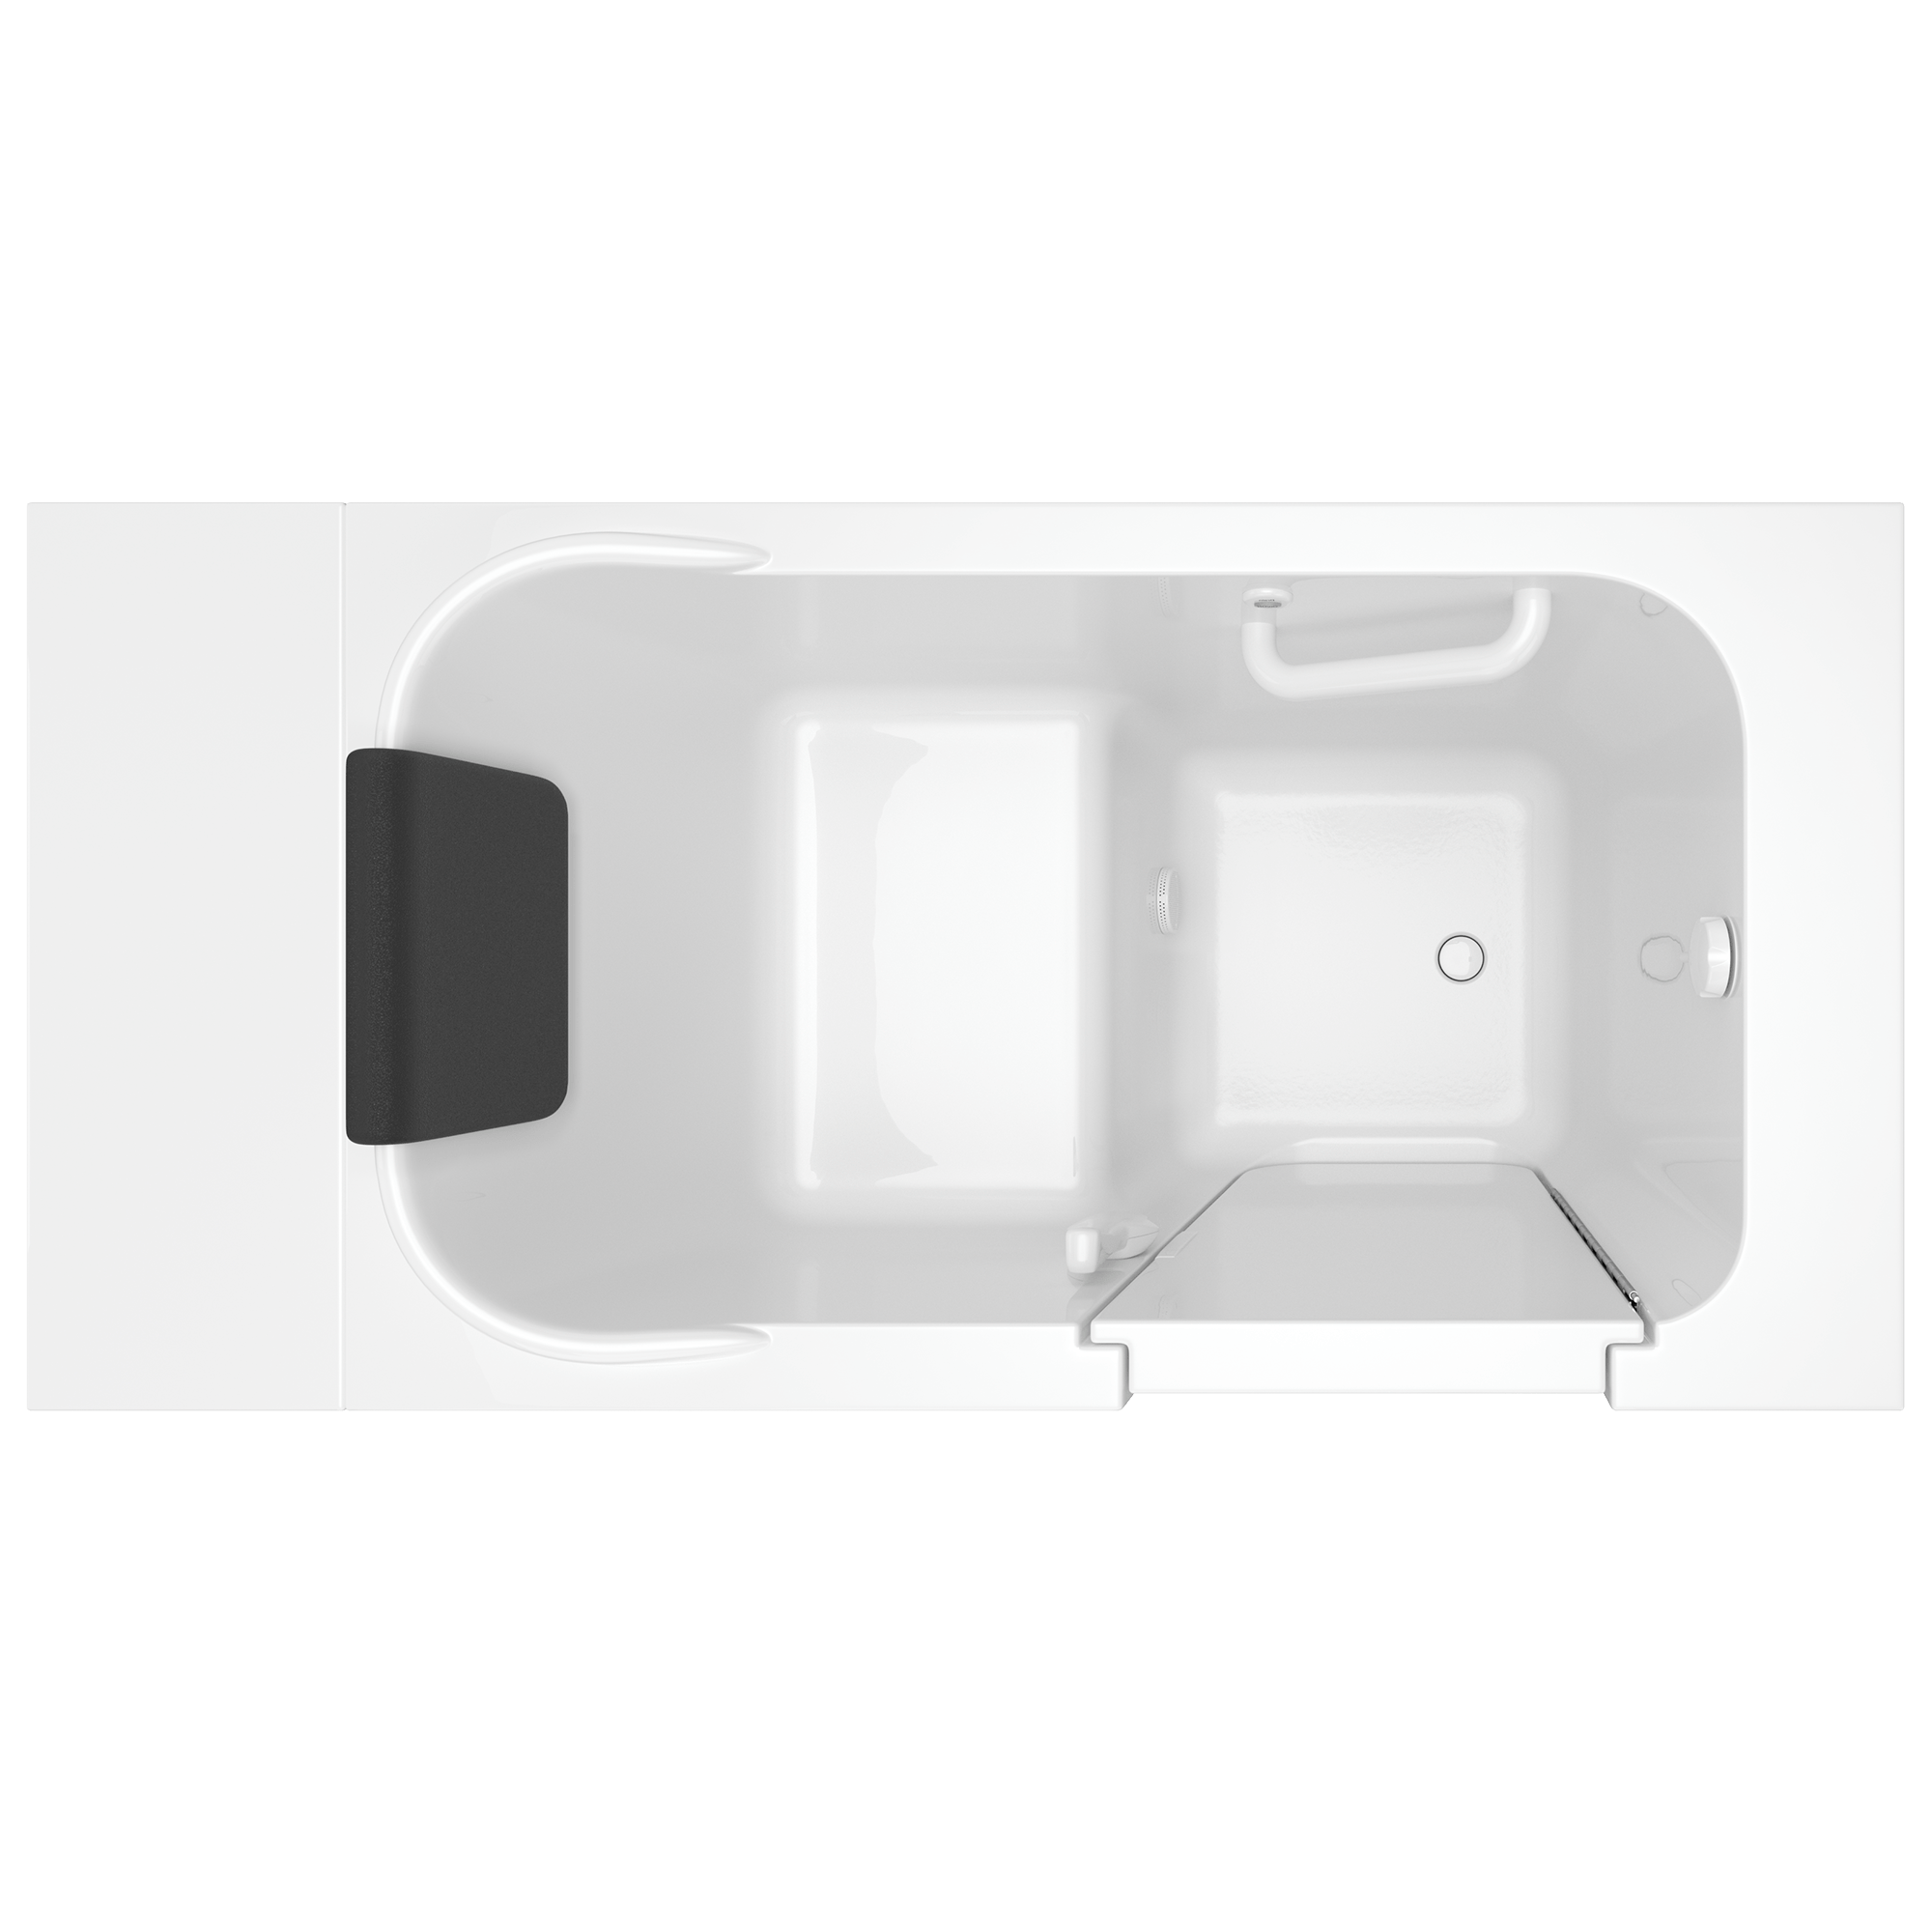 Gelcoat Premium Series 28 x 48-Inch Walk-in Tub With Soaker System - Right-Hand Drain